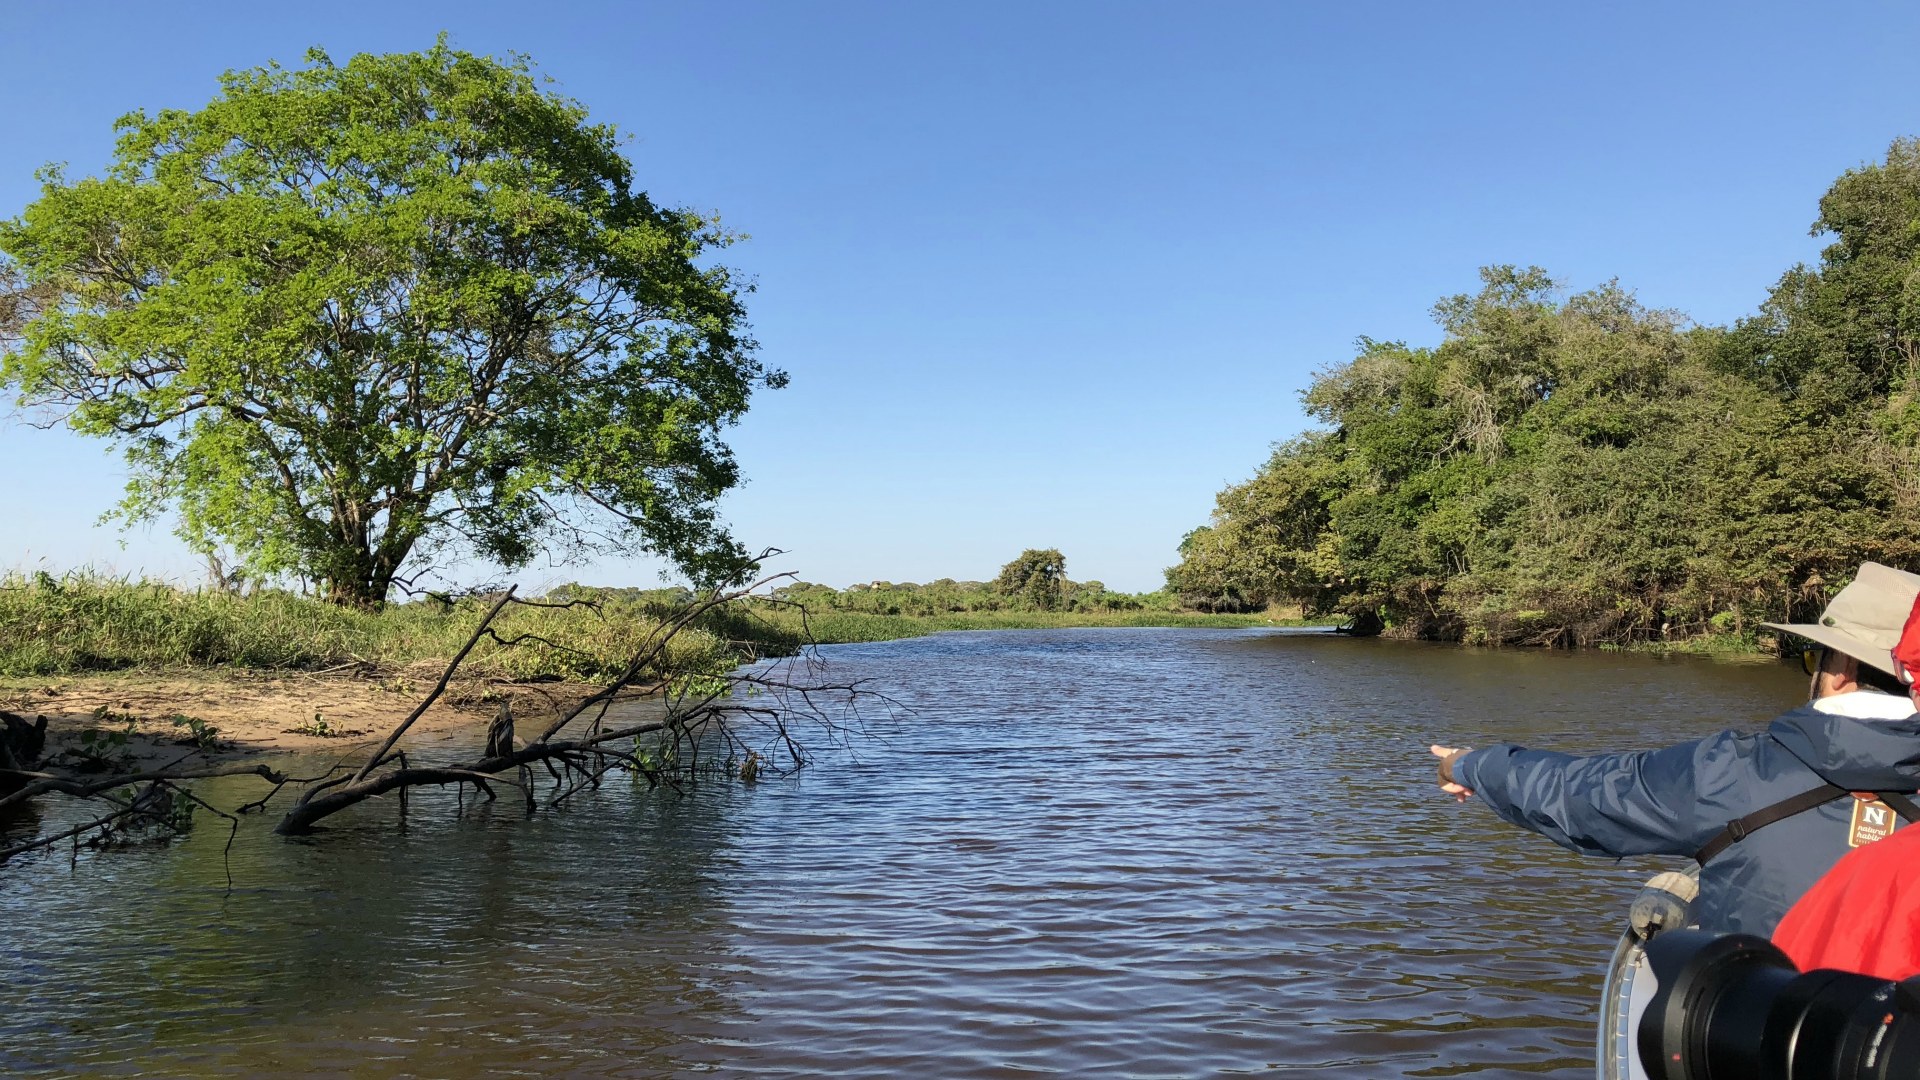 Searching for wildlife, Central Pantanal